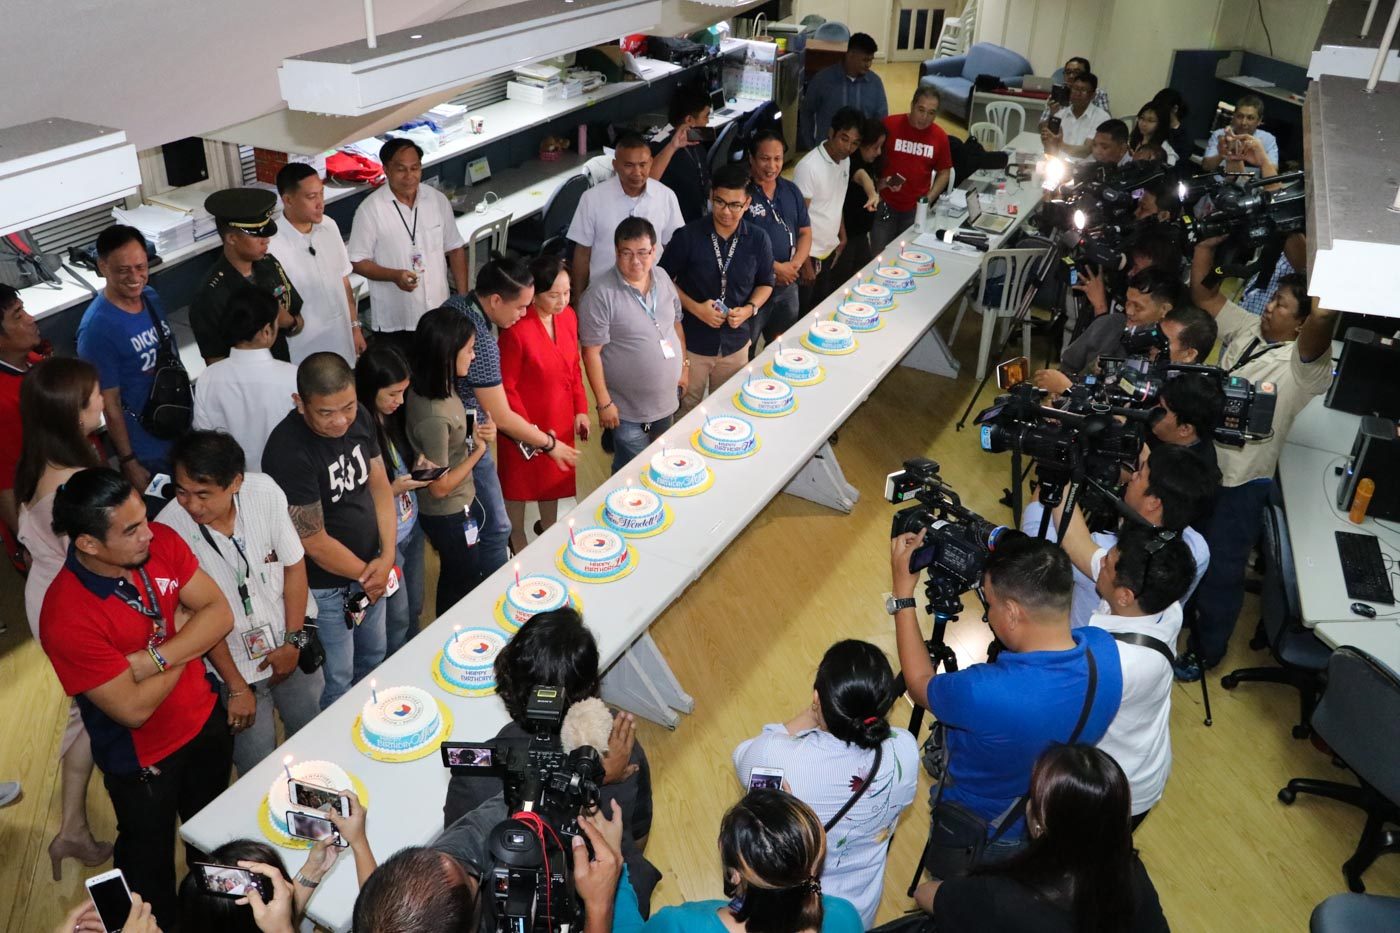 LOOK: Arroyo gives birthday cakes to House journalists